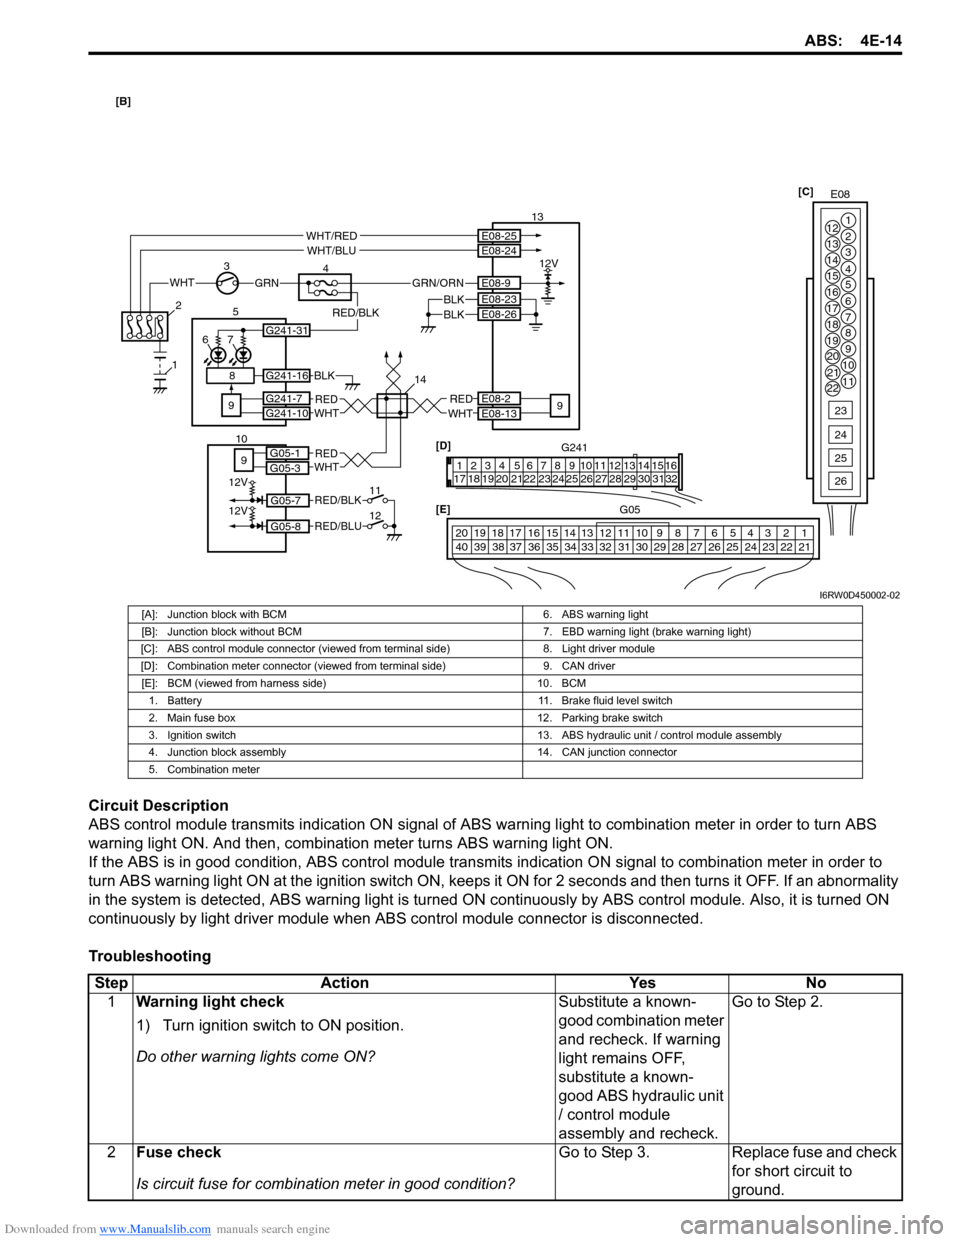 SUZUKI SX4 2006 1.G Service Workshop Manual Downloaded from www.Manualslib.com manuals search engine ABS: 4E-14
Circuit Description
ABS control module transmits indication ON signal of ABS warning light to combination meter in order to turn ABS